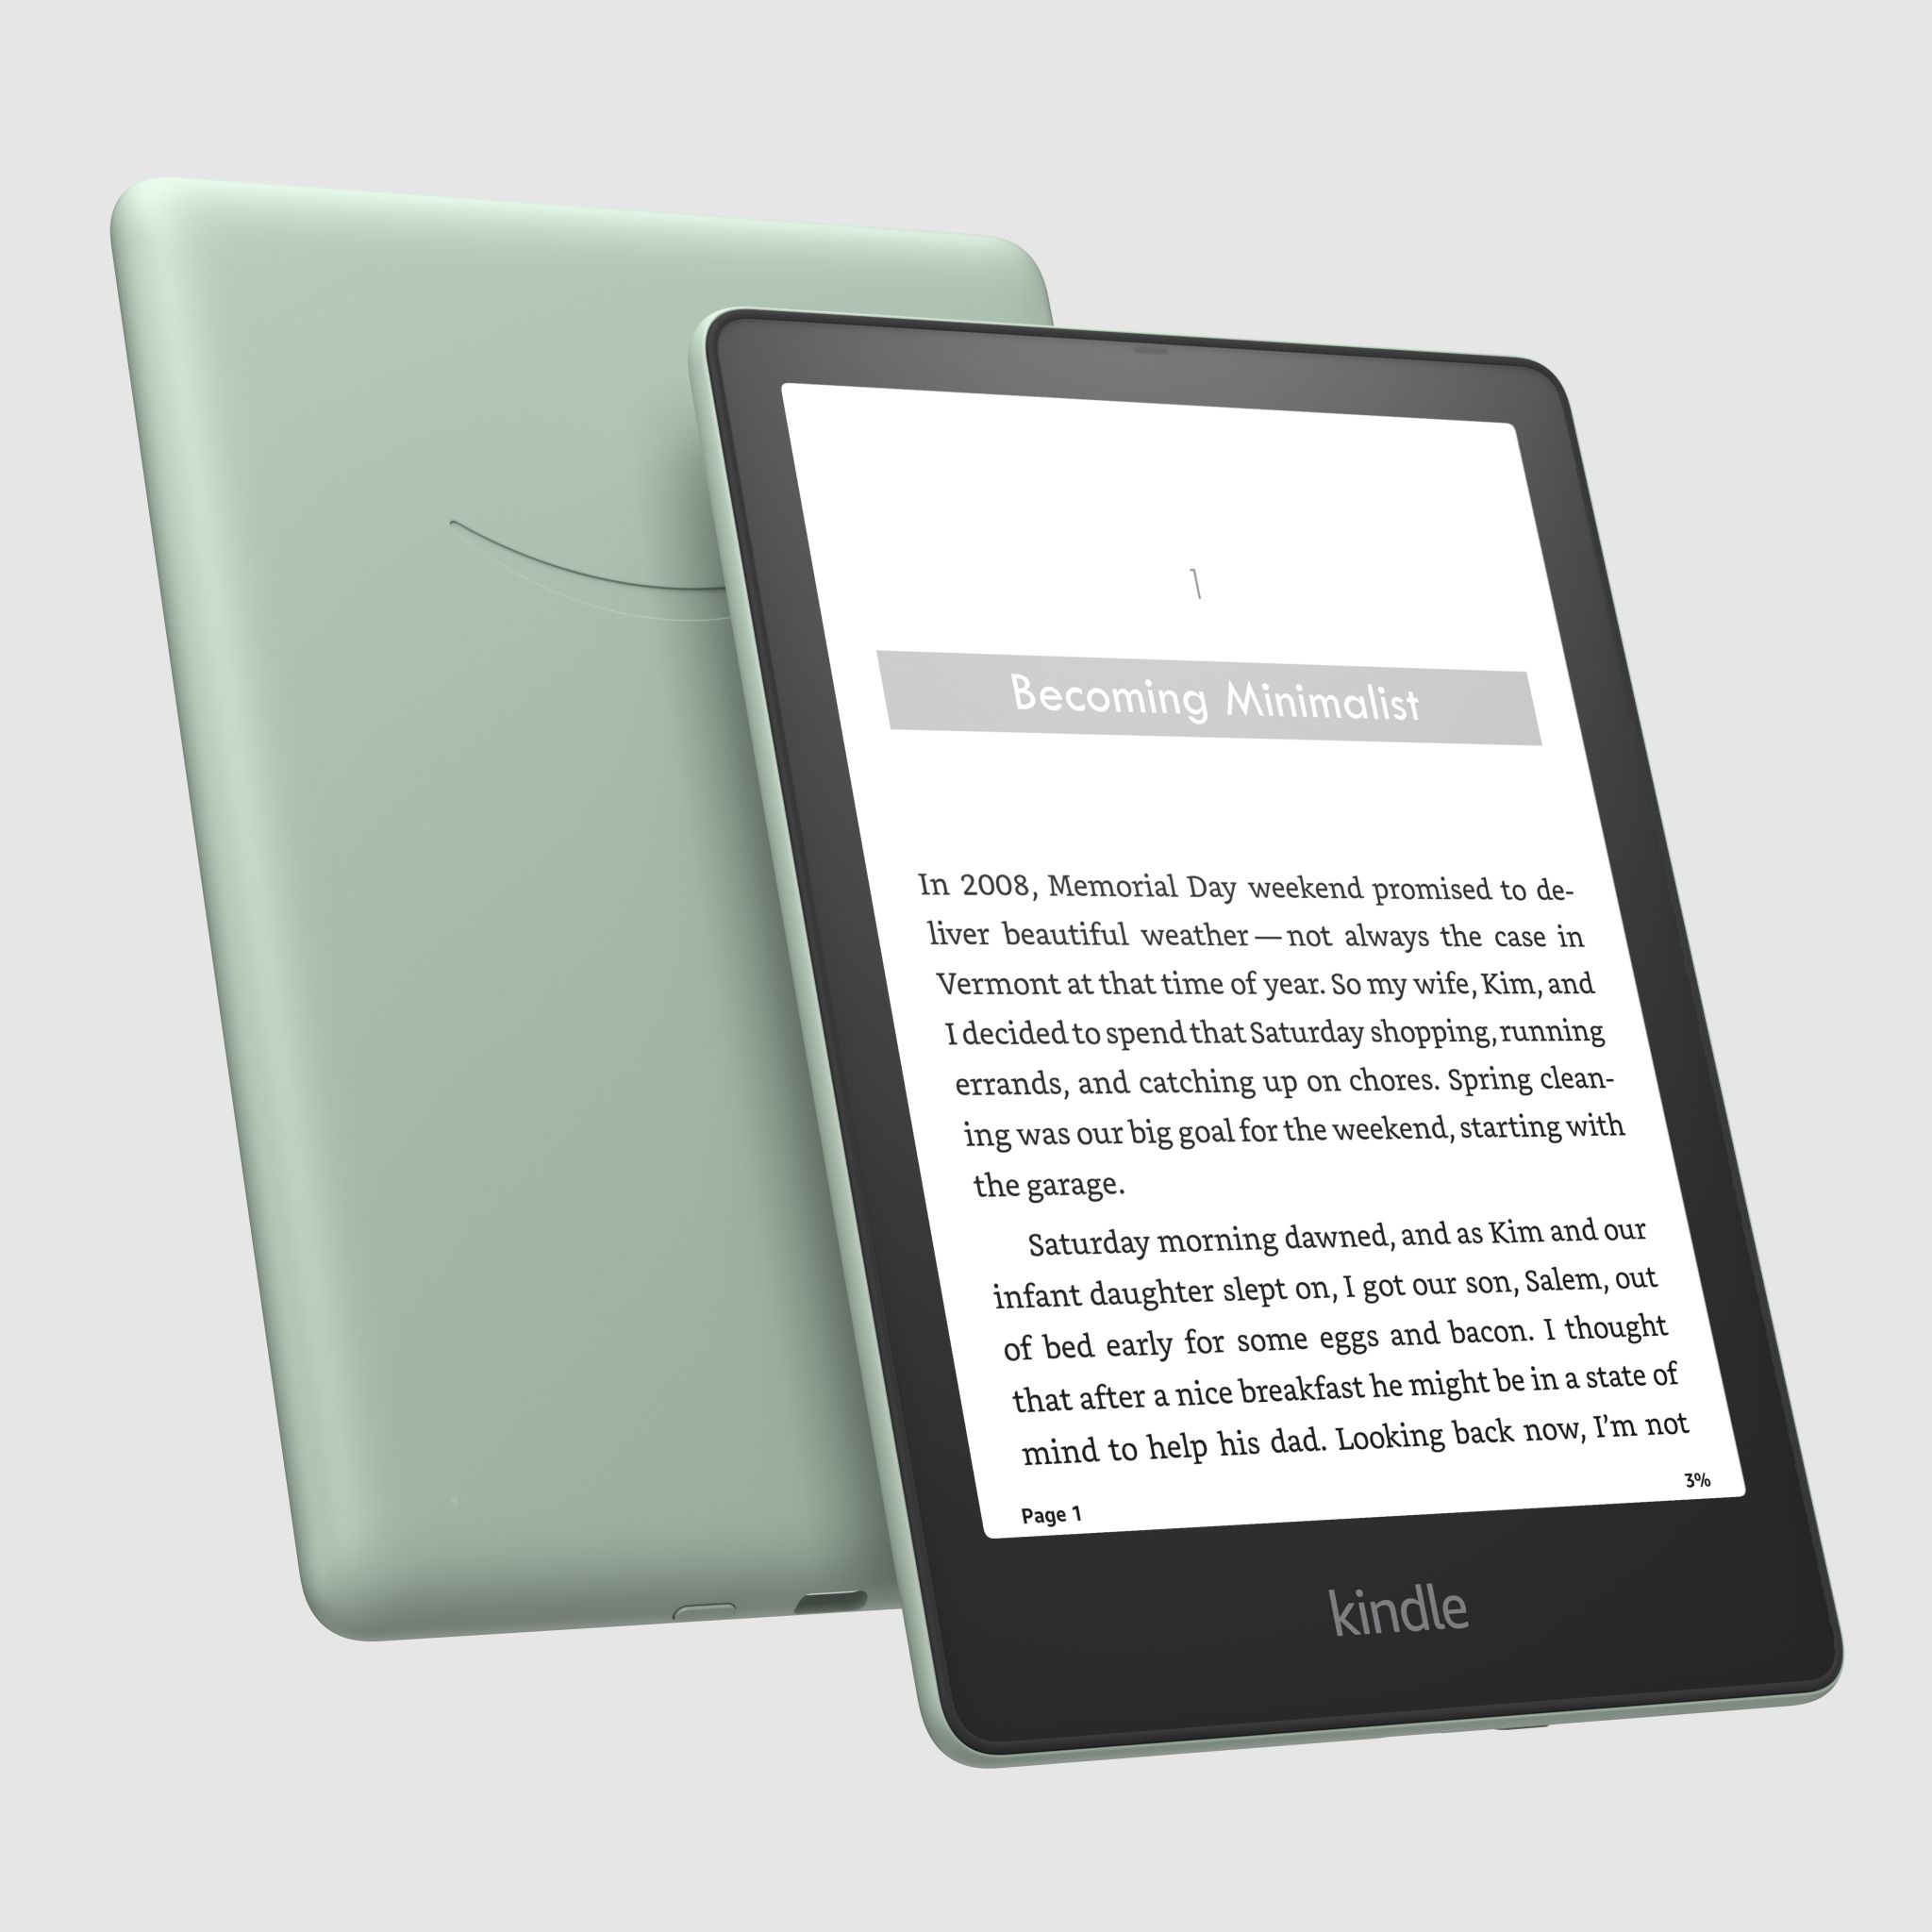 Adds 2 New Color Options for Kindle Paperwhite